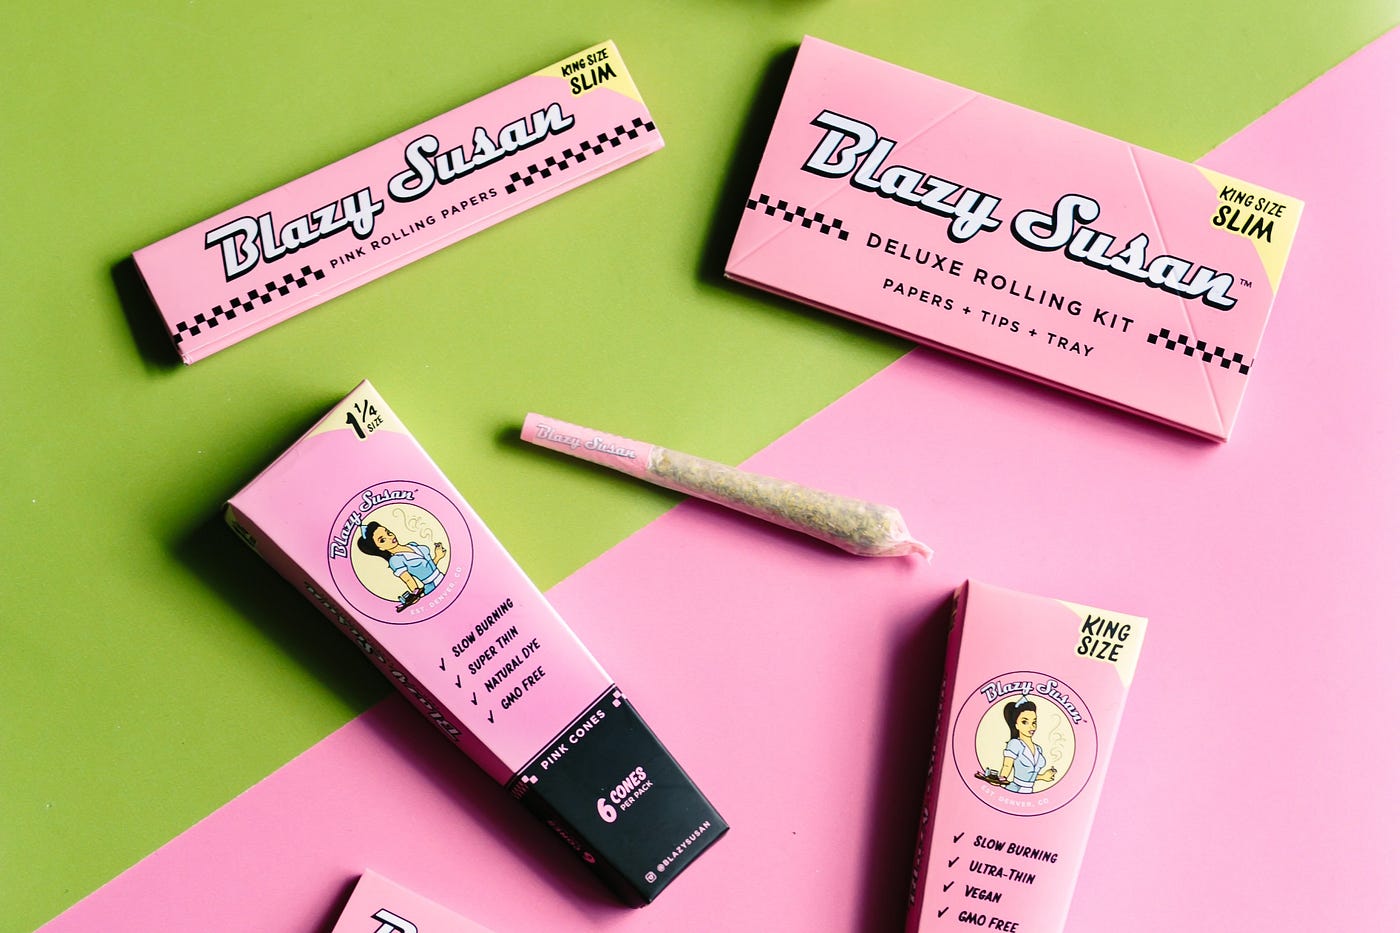 Blazy Susan Deluxe Rolling Kit